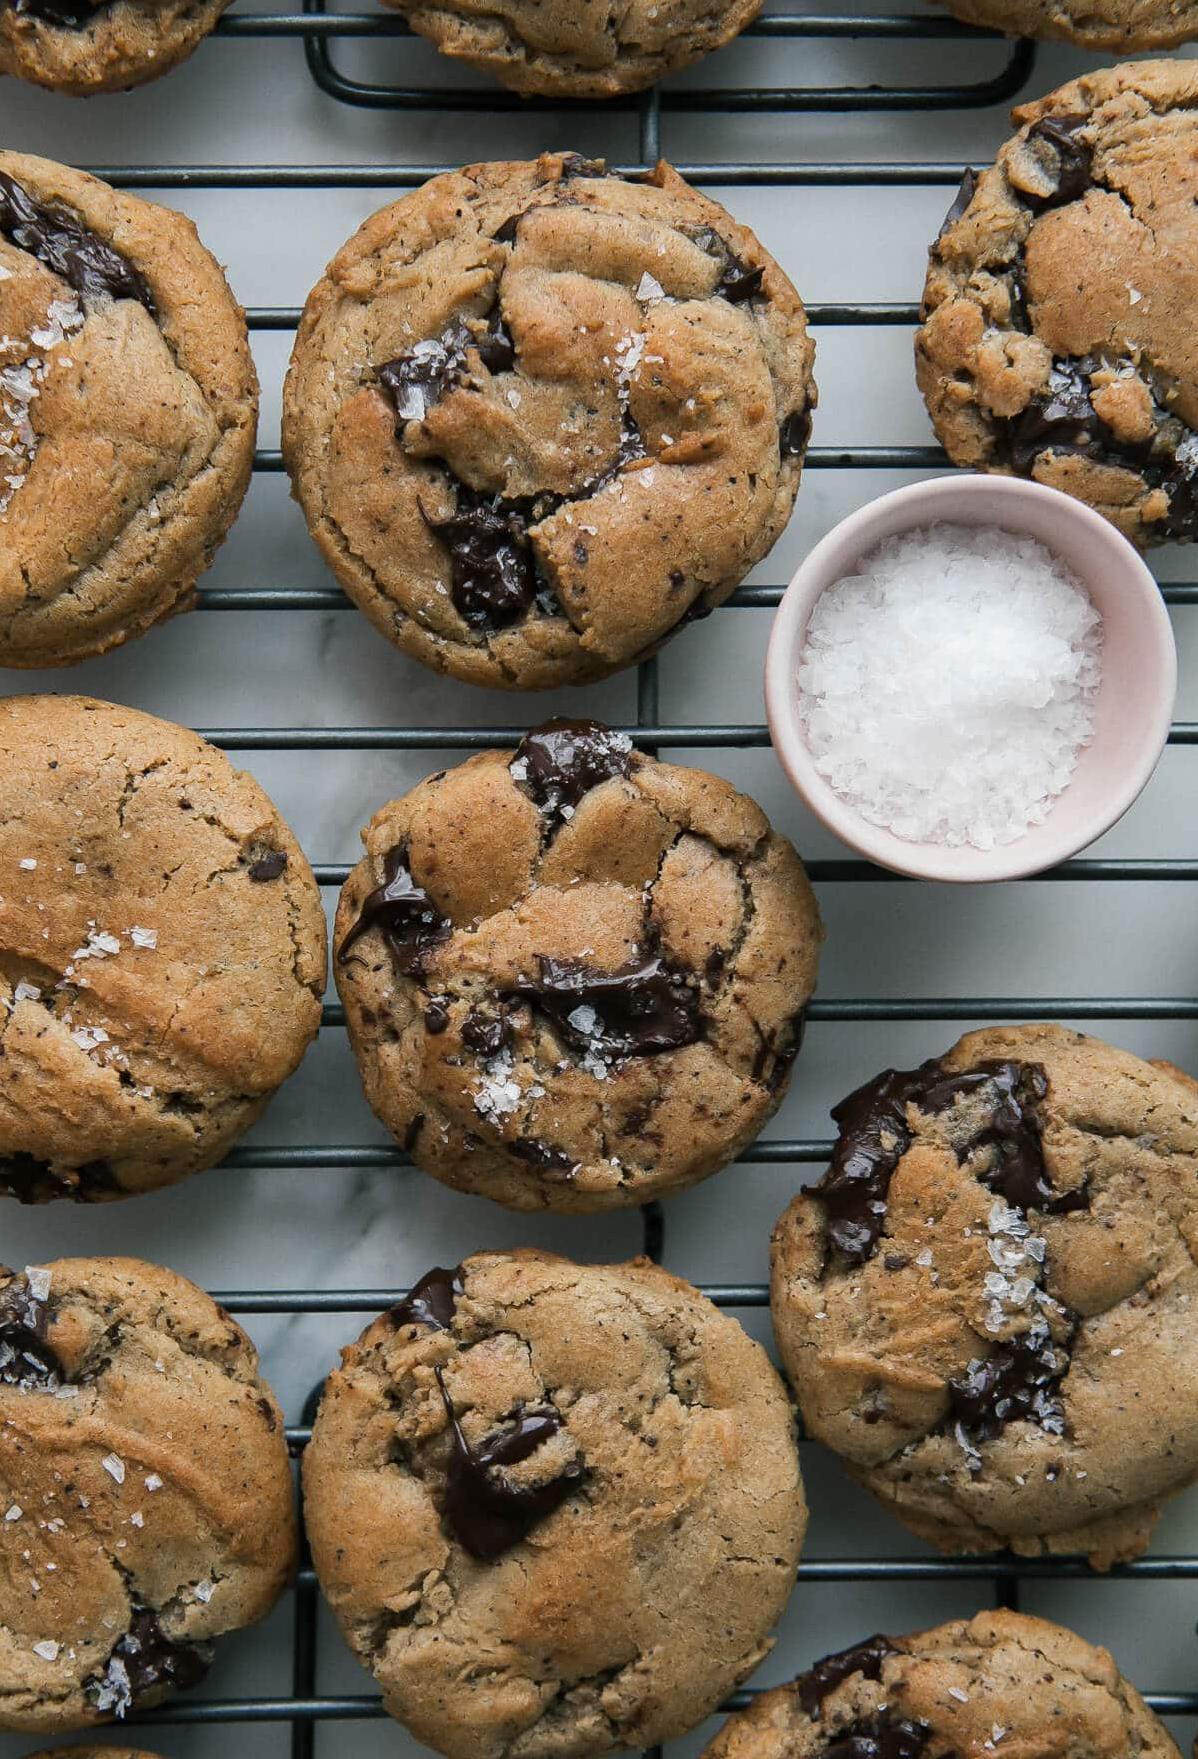  Bite into a crunchy and decadent Espresso and Chocolate Chip Cookie for a sweet afternoon treat.